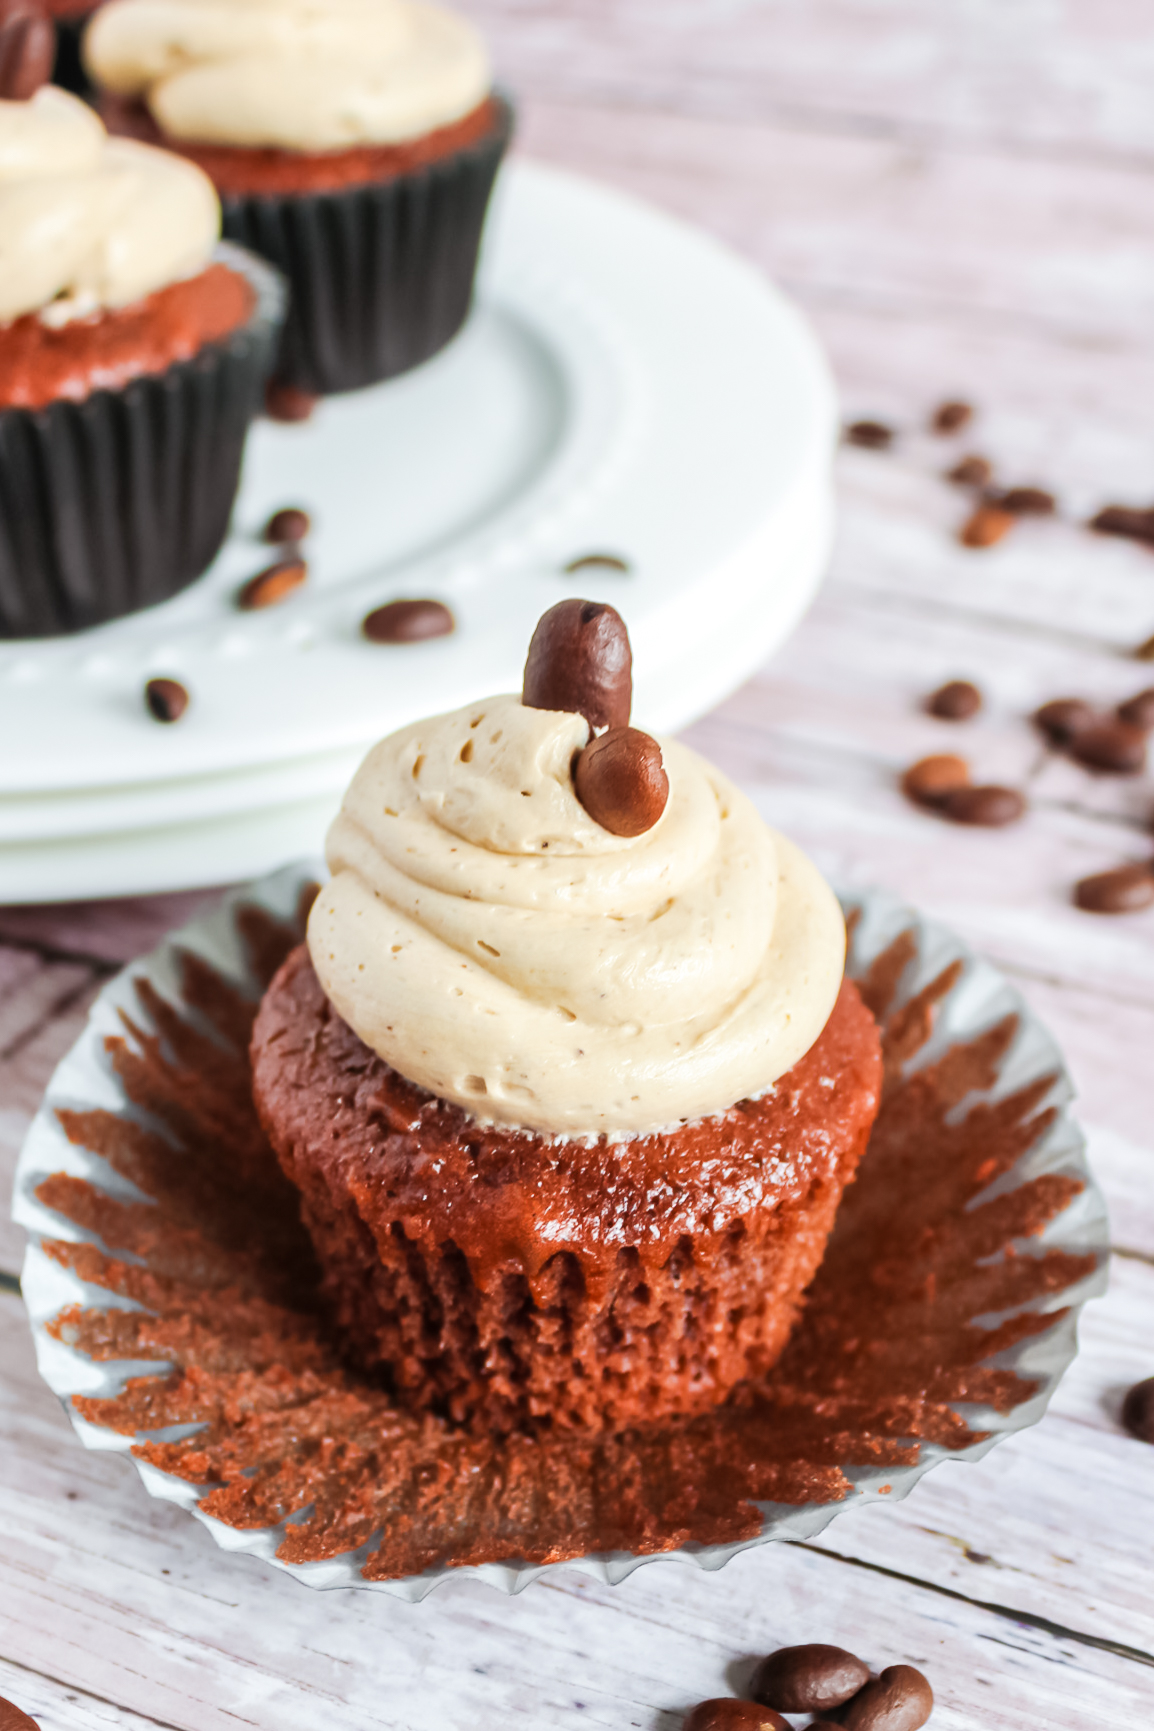 A chocolate cupcake frosted with coffee buttercream sitting on a wrapper exposing the crumb texture of the cupcake.